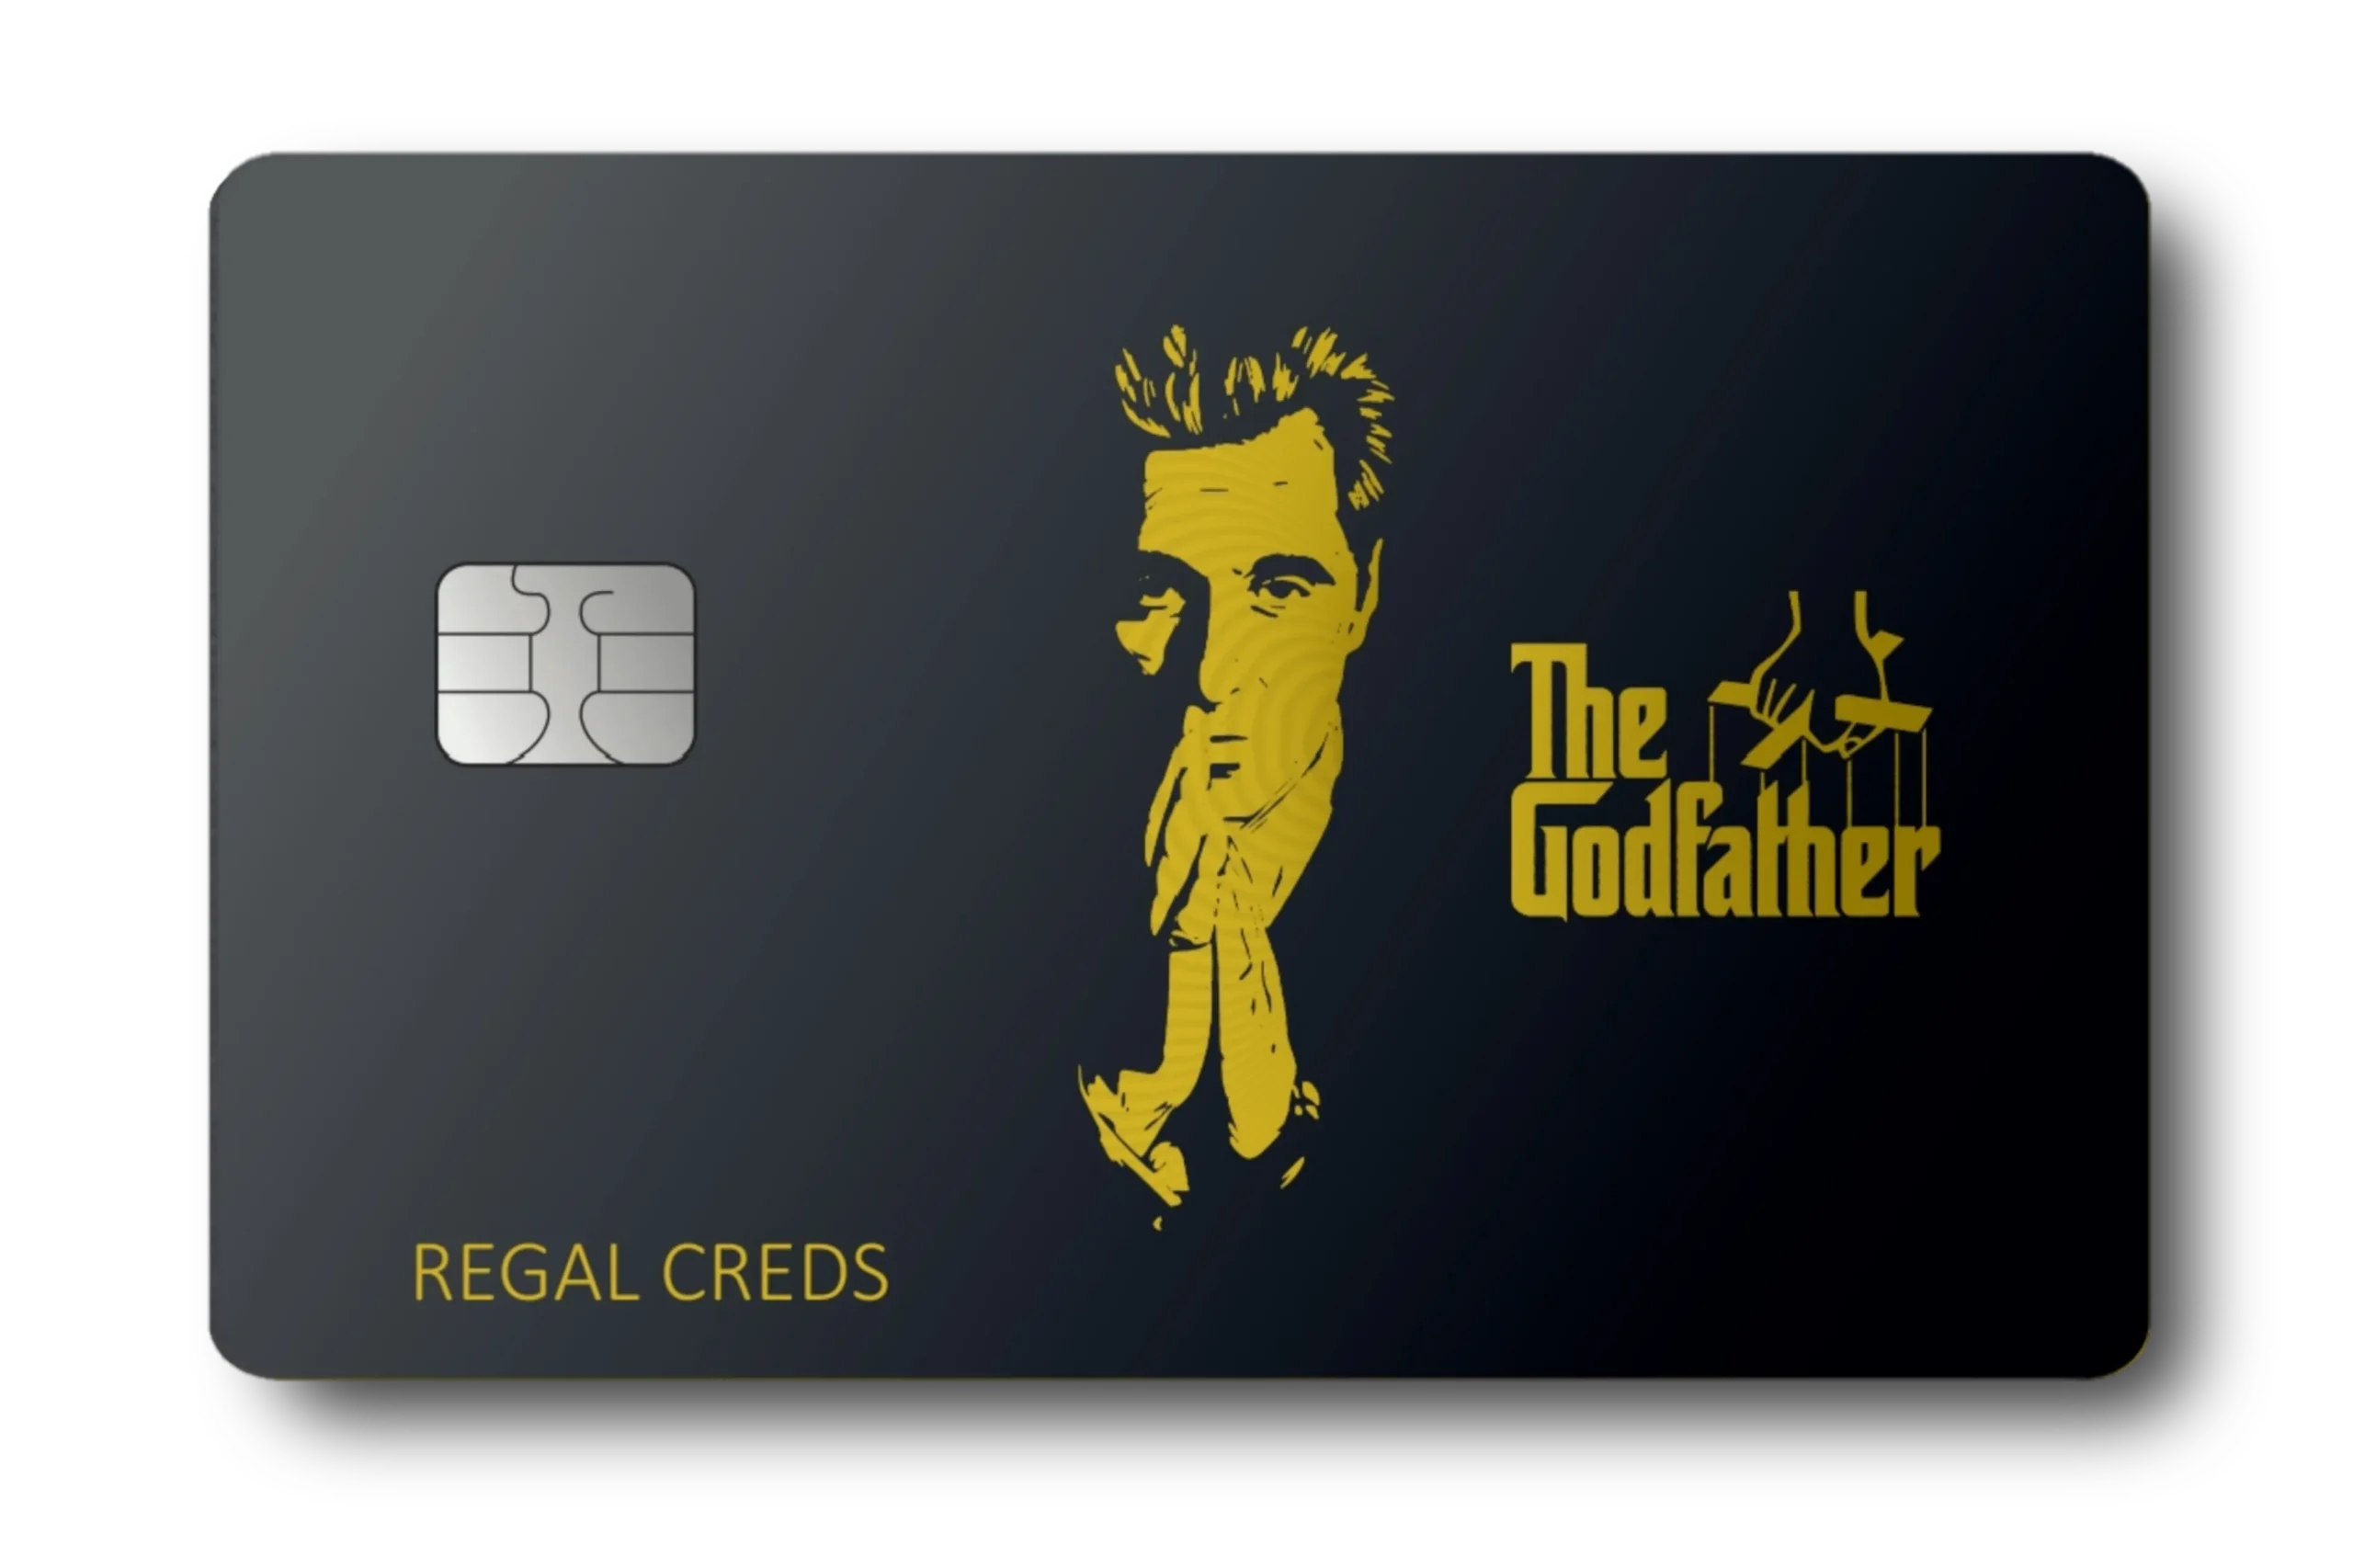 The 'Godfather' Card